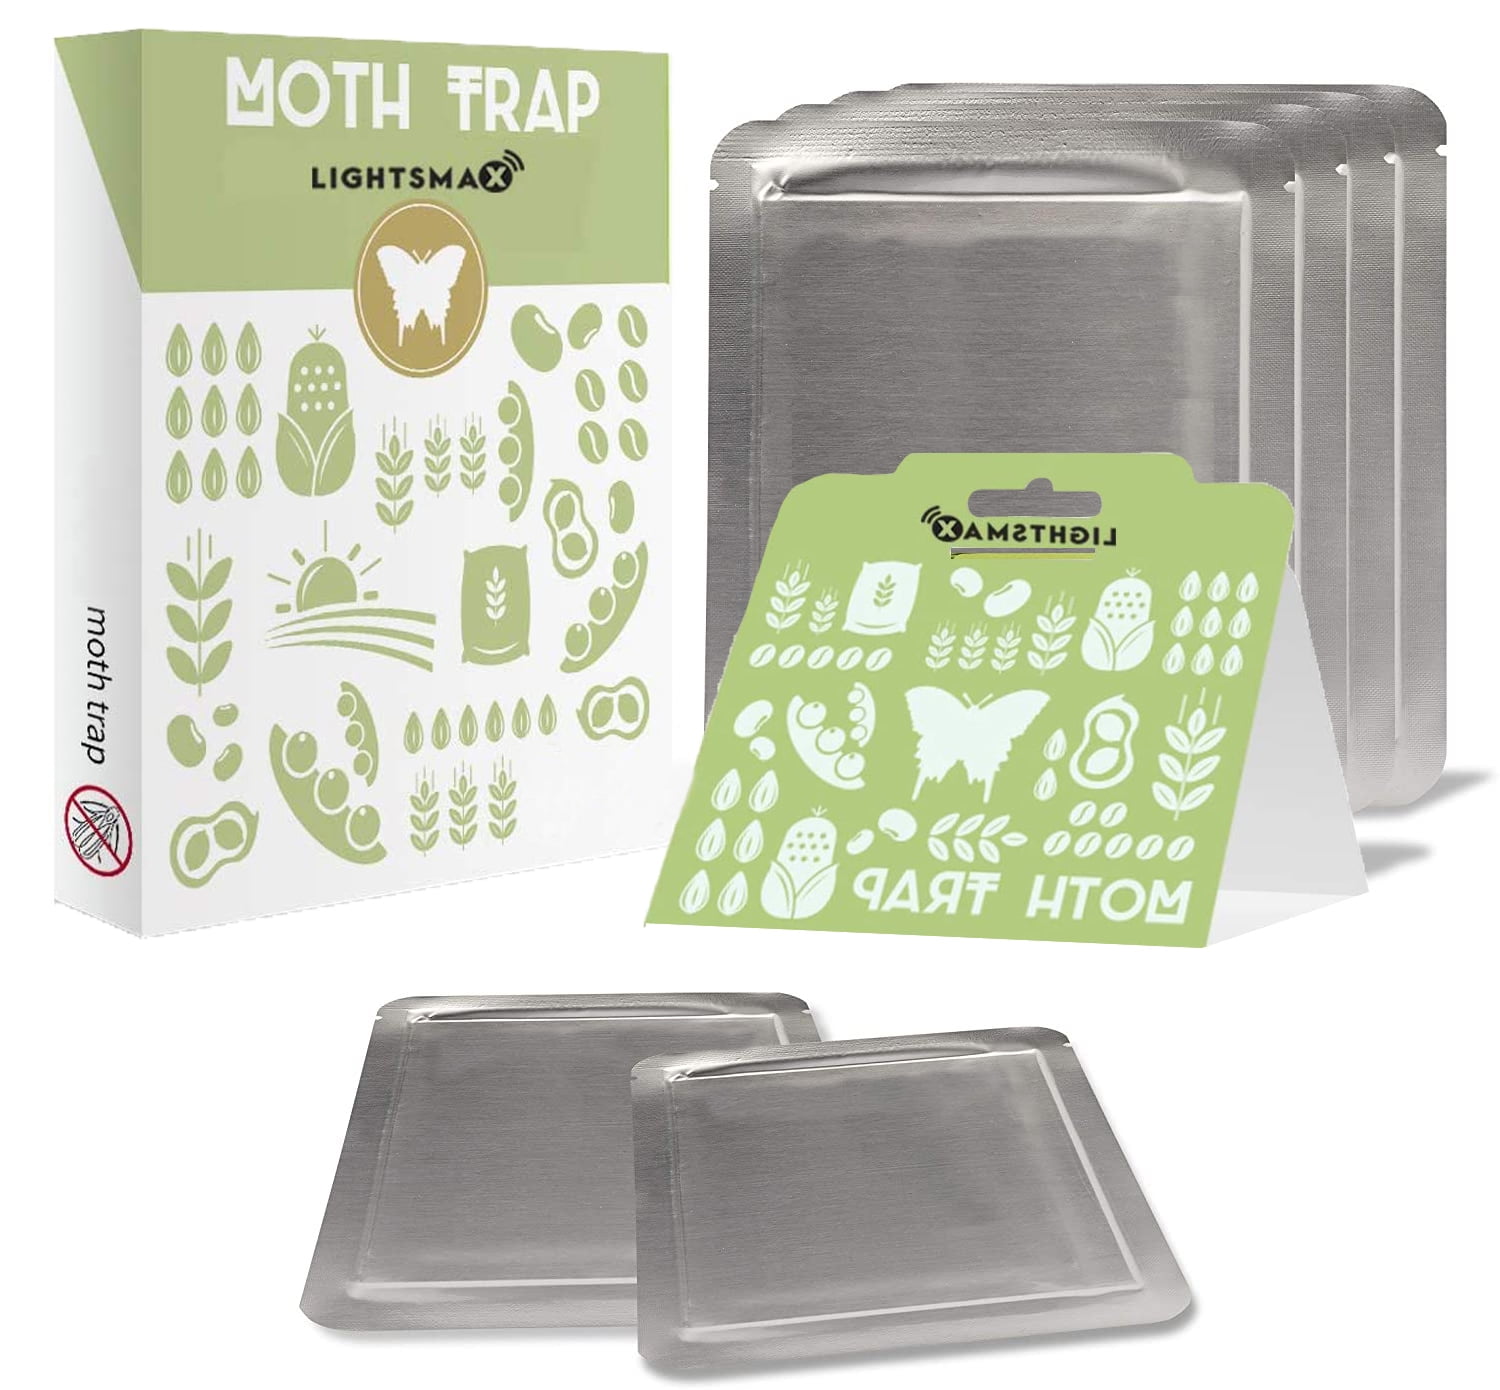 Faicuk Pantry Moth Traps with Pre-Baited Safe Pheromone Attractant Insecticide-Free and Non-Toxic 12-Pack Odor-Free